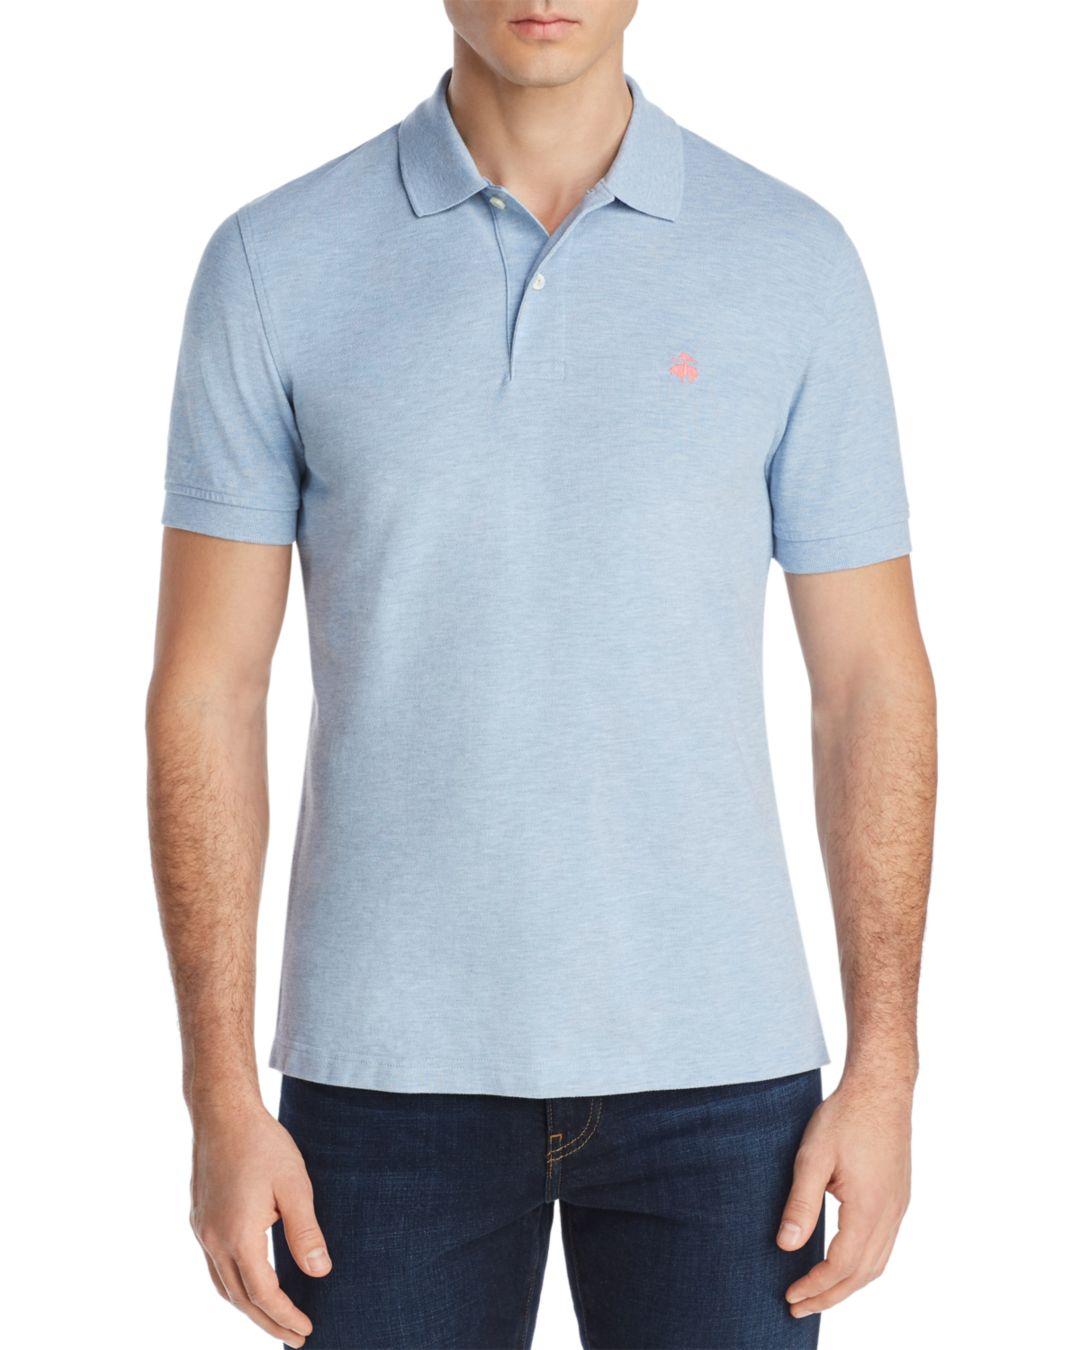 Lyst - Brooks Brothers Performance Slim Fit Piqué Polo Shirt in Blue ...